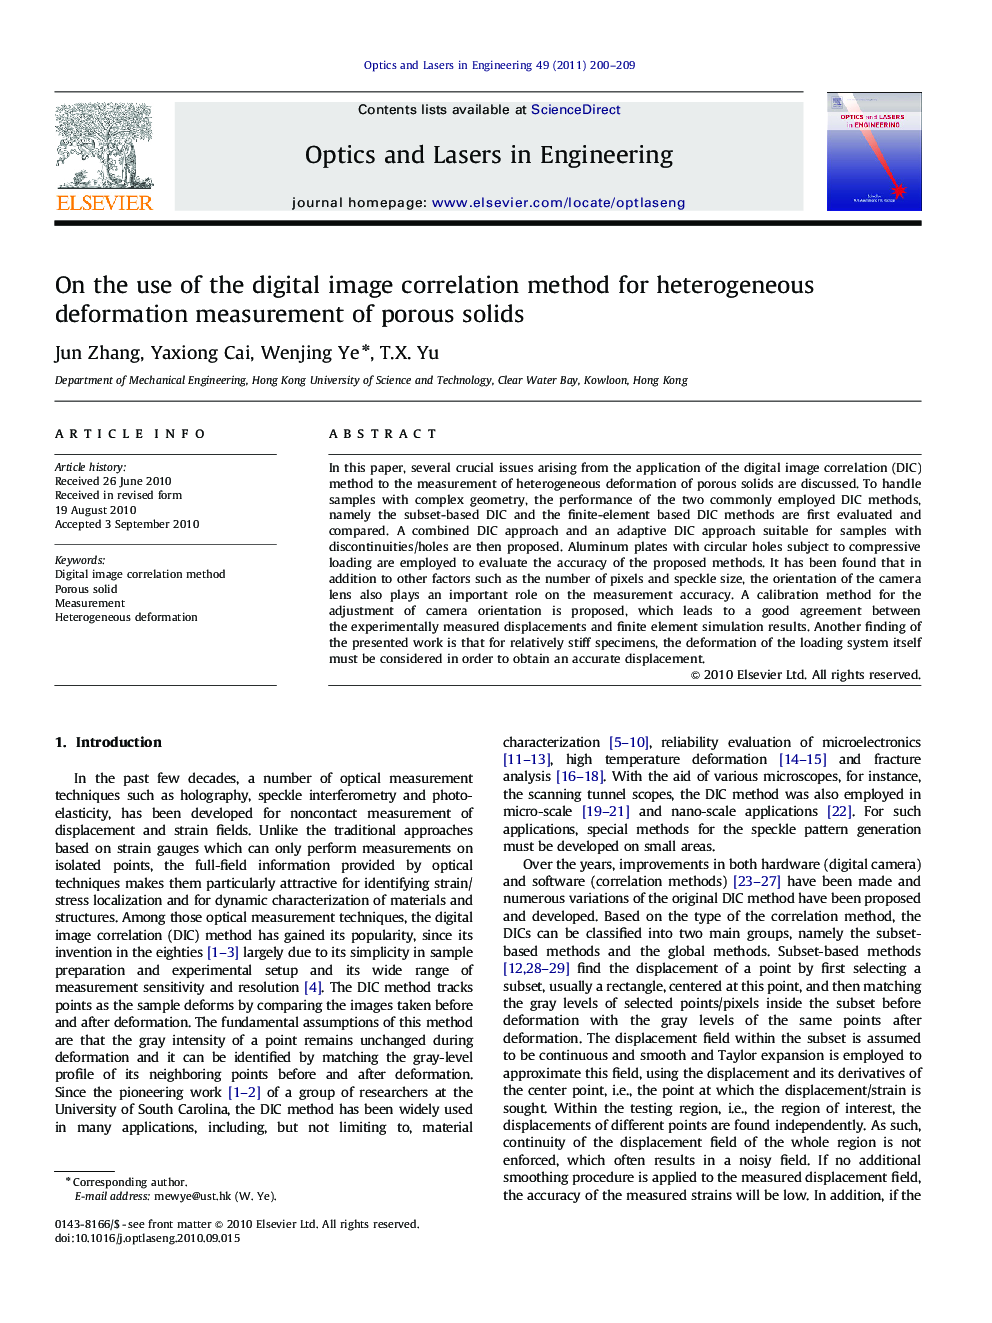 On the use of the digital image correlation method for heterogeneous deformation measurement of porous solids